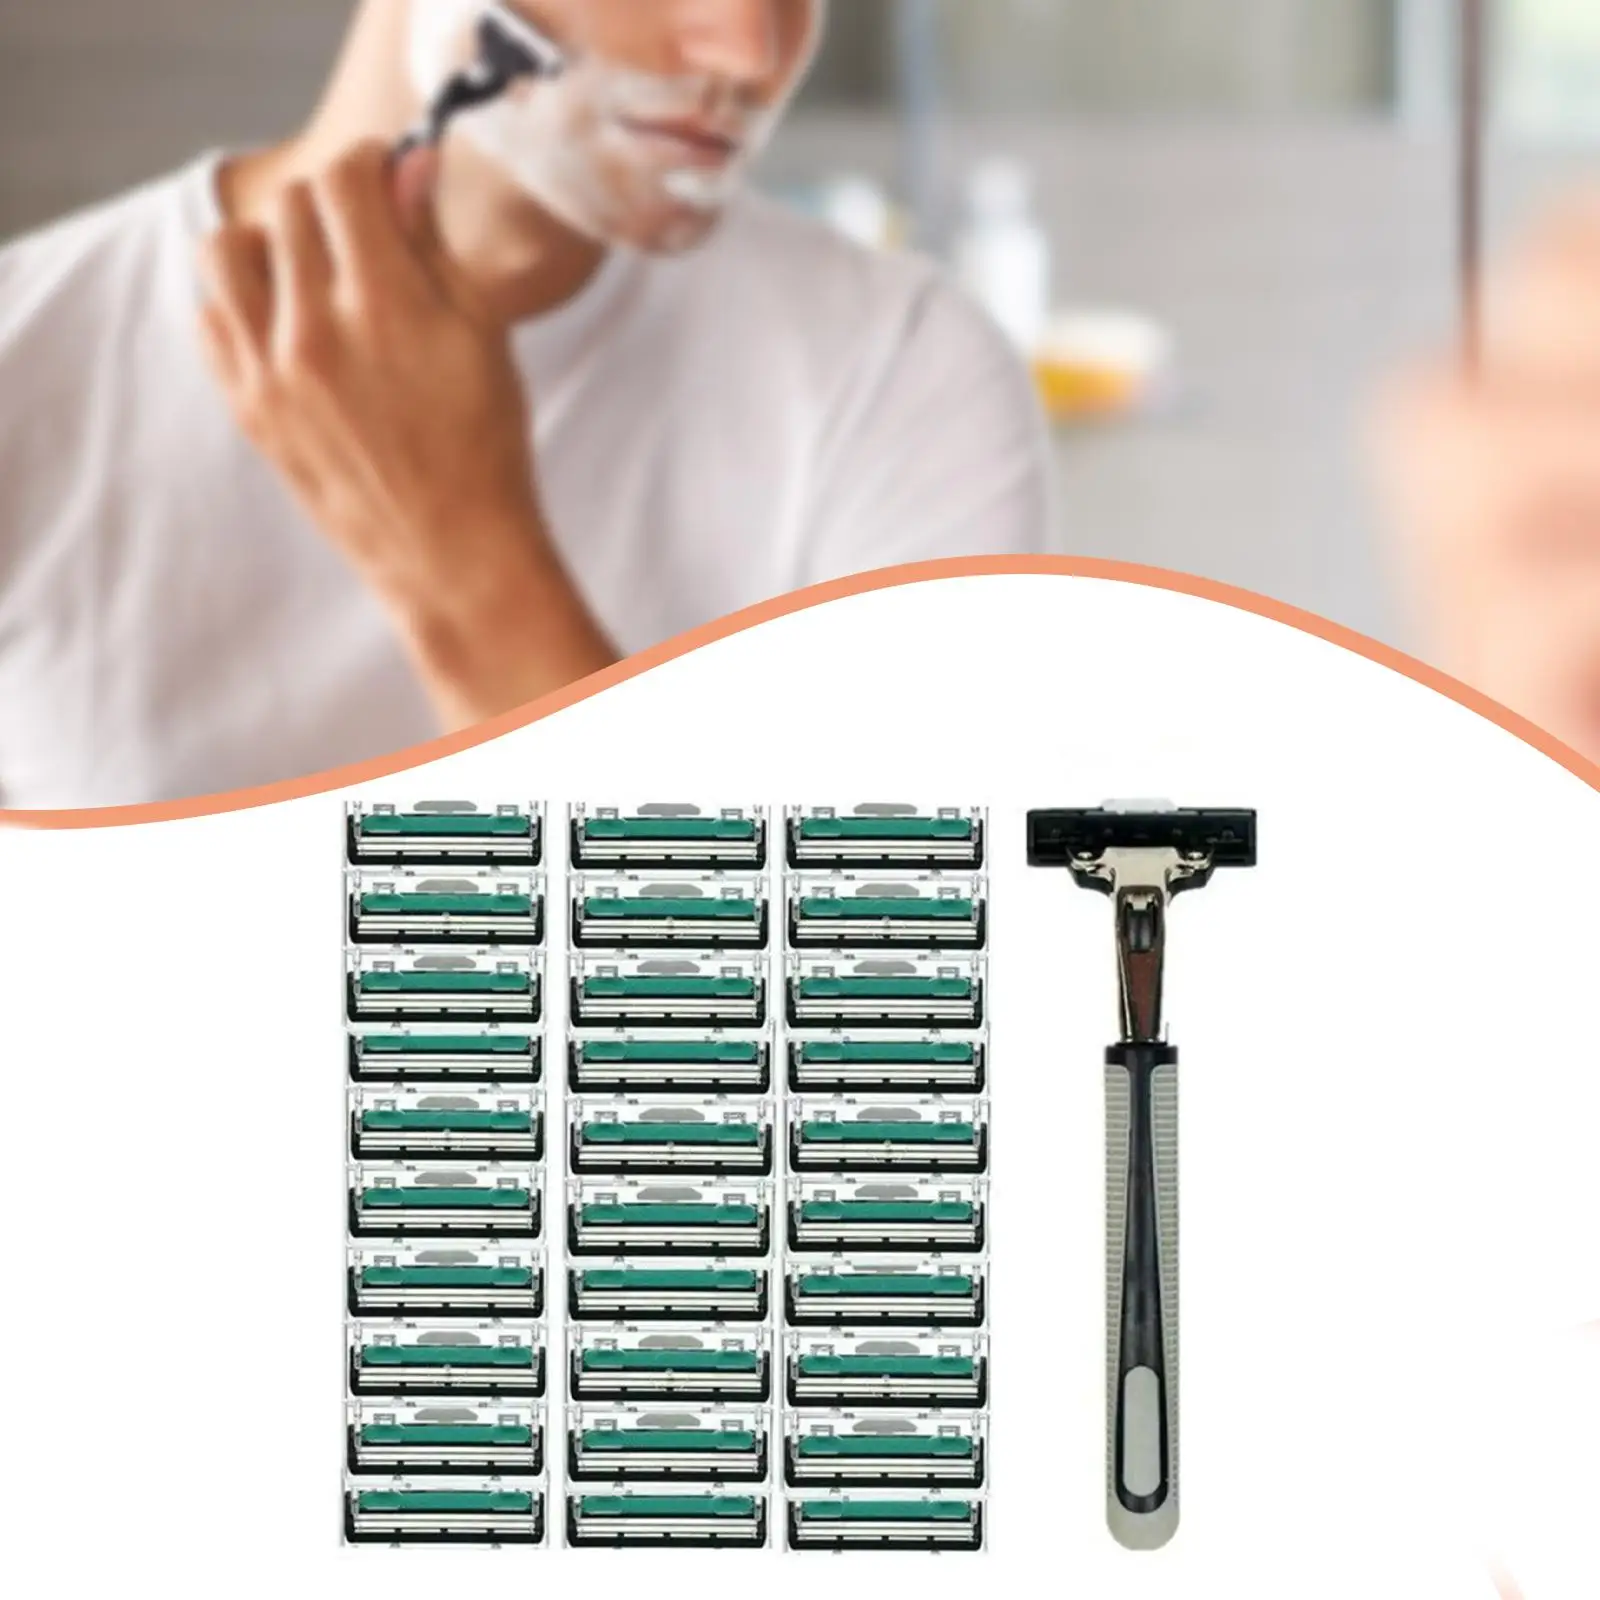 Stainless Steel Double Edge Shaver Face Shaver Nonslip Handle Heavy Duty Hair Remover Grooming Replaceable for Travel Home Salon